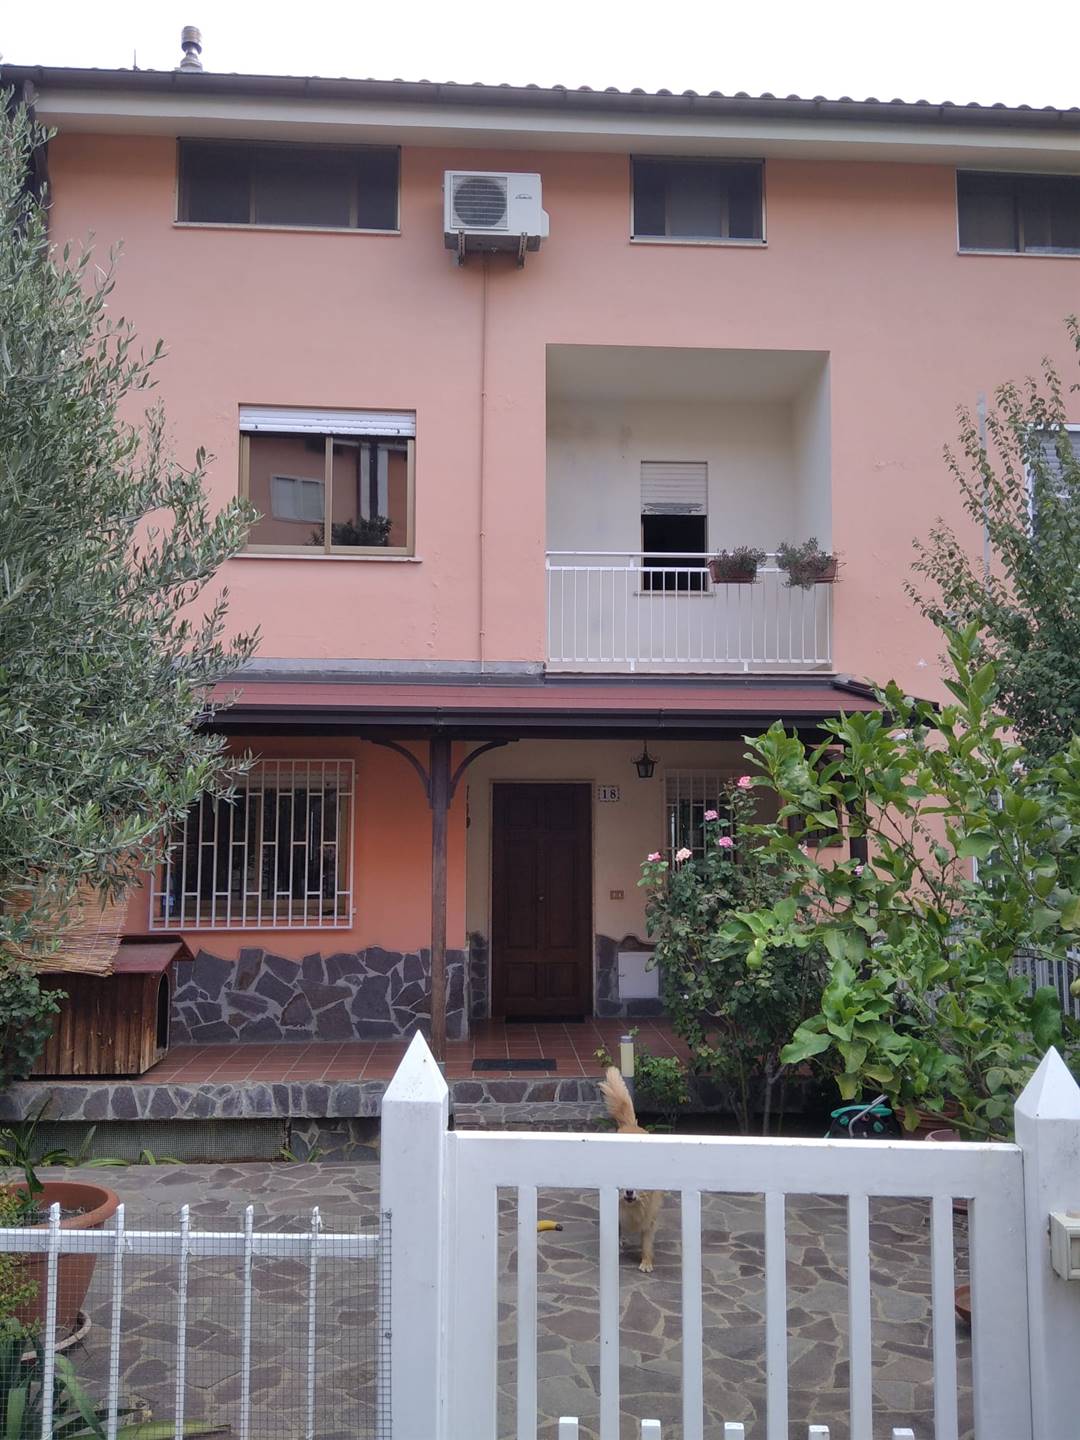 SERRA MICELI, CASTROLIBERO, Terraced villa for sale of 200 Sq. mt., Habitable, Heating Individual heating system, Energetic class: F, placed at 